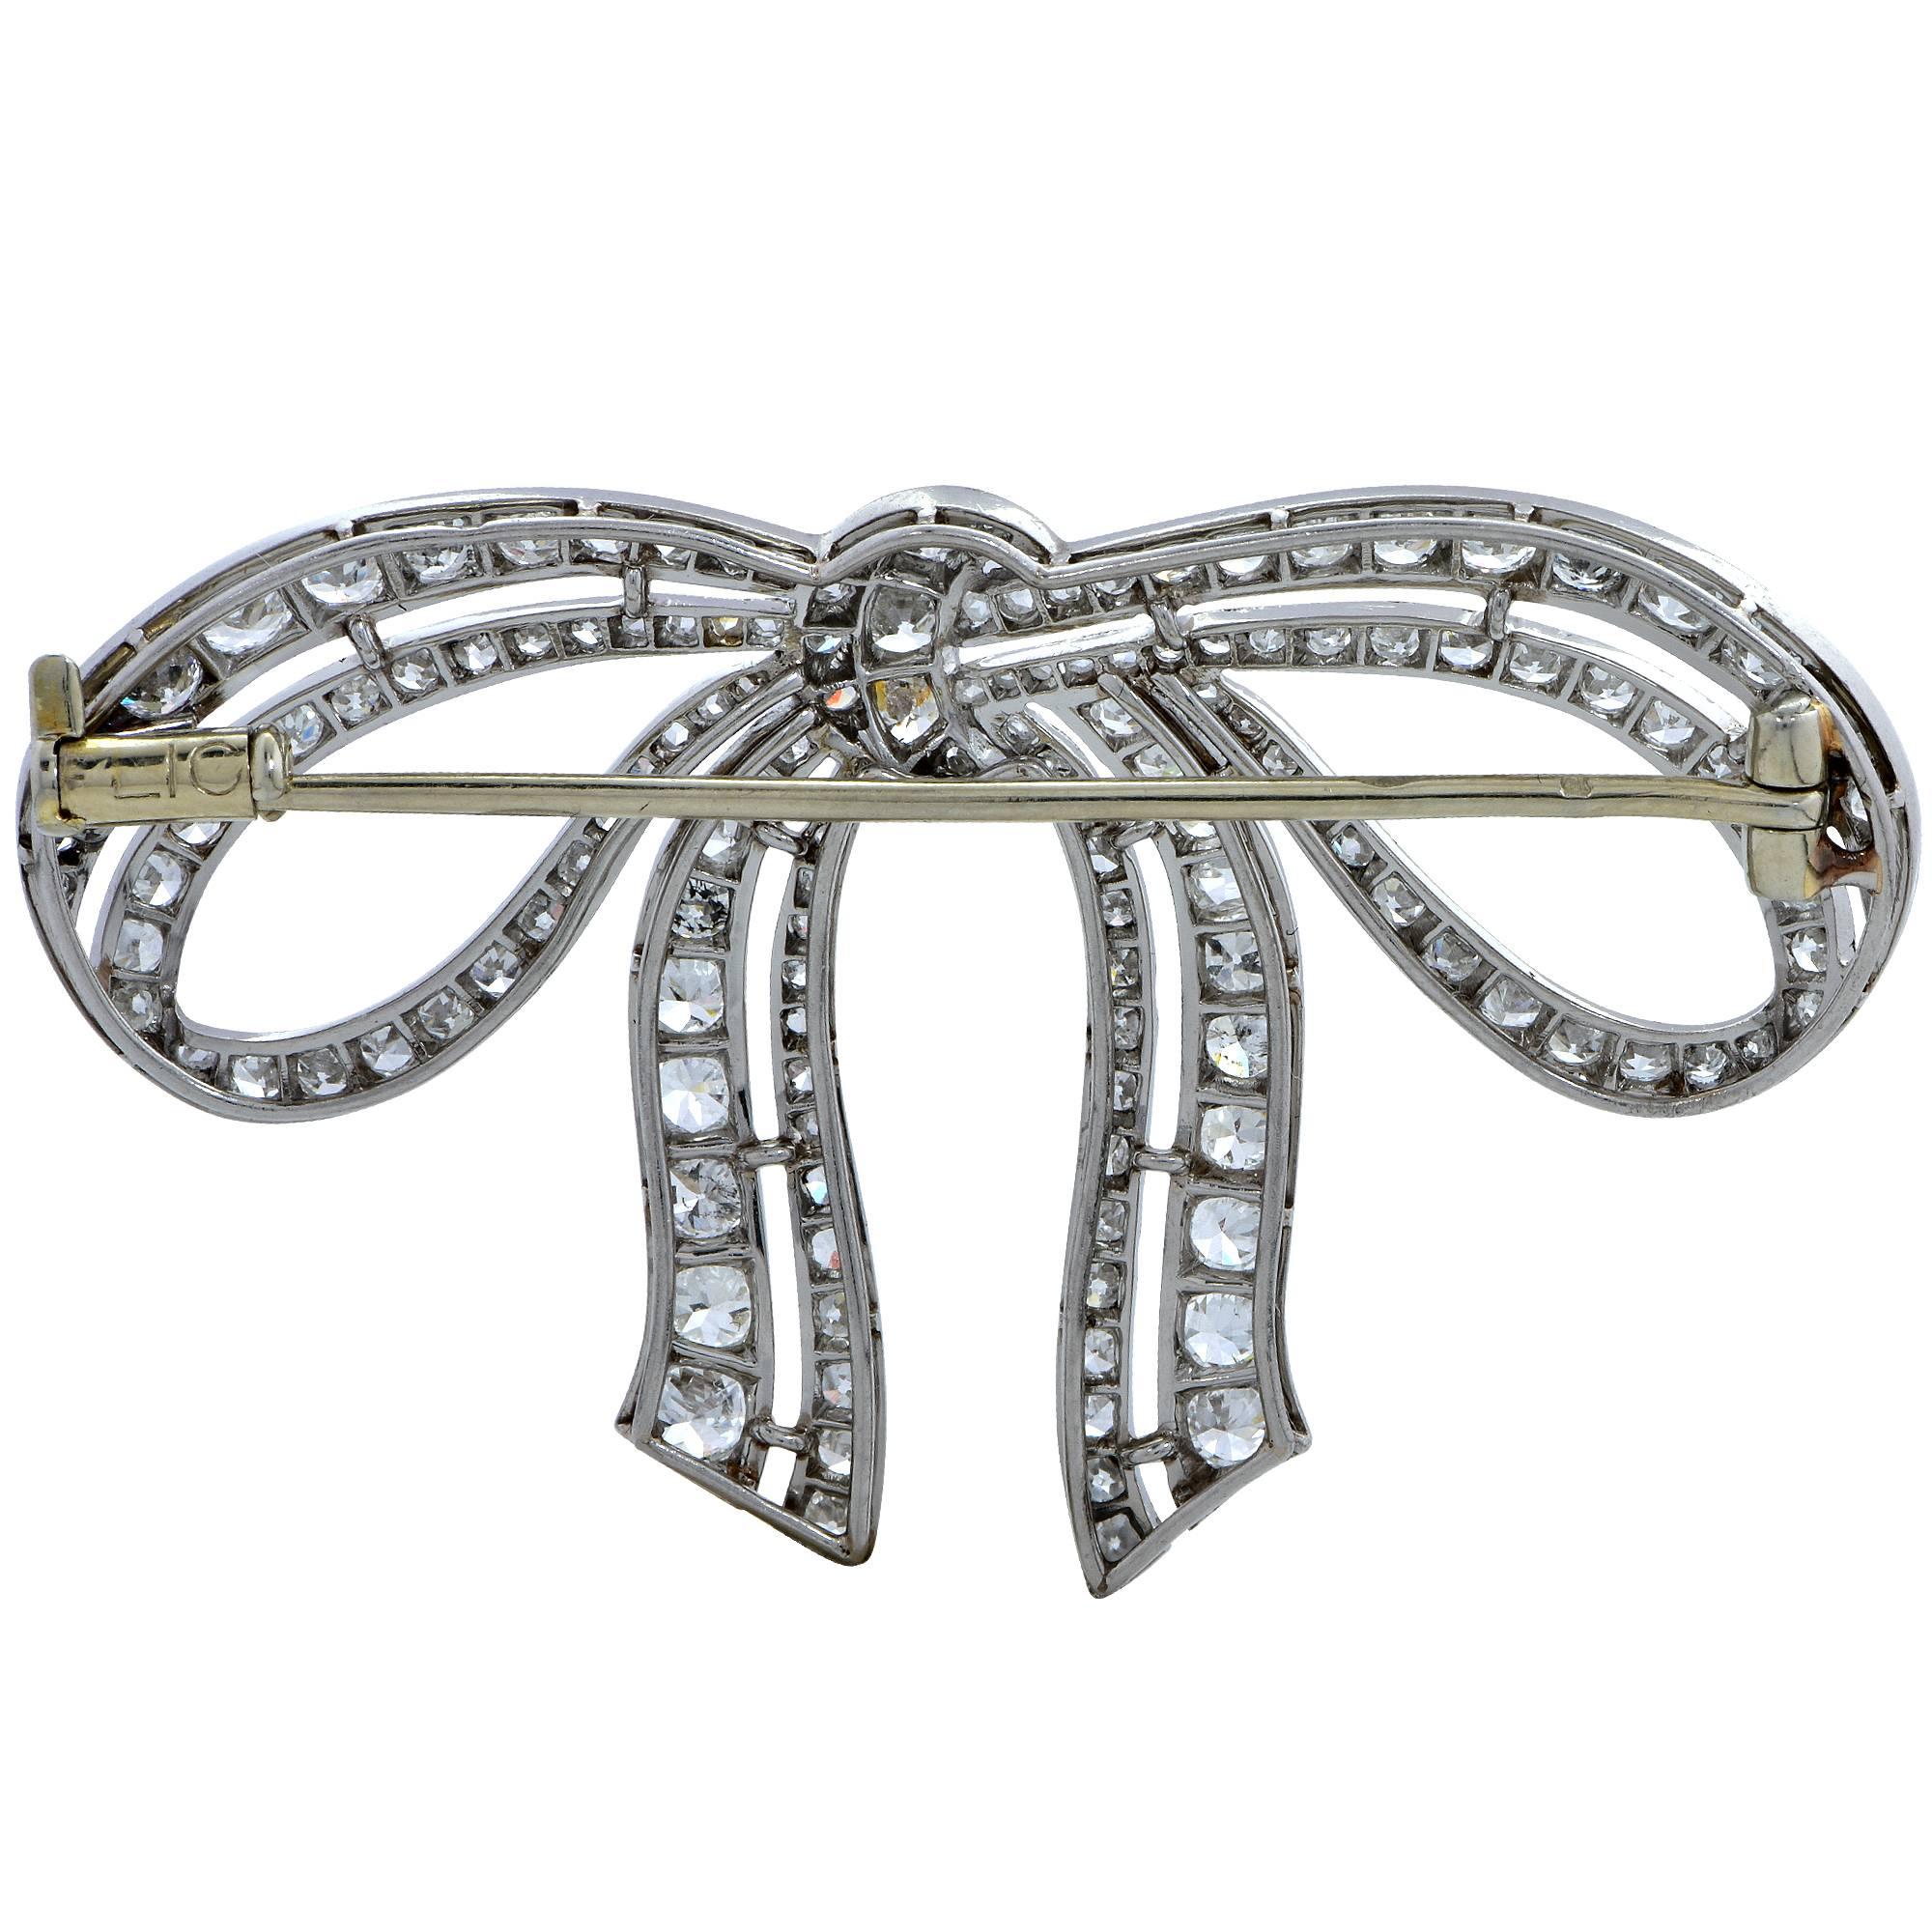 Spectacular French brooch circa 1920s handcrafted out of platinum featuring approximately 3.70cts of European, single and rose cut diamonds, F- G color, VS- SI clarity. Bearing French hallmarks, this classic Art Deco brooch is magnificently crafted